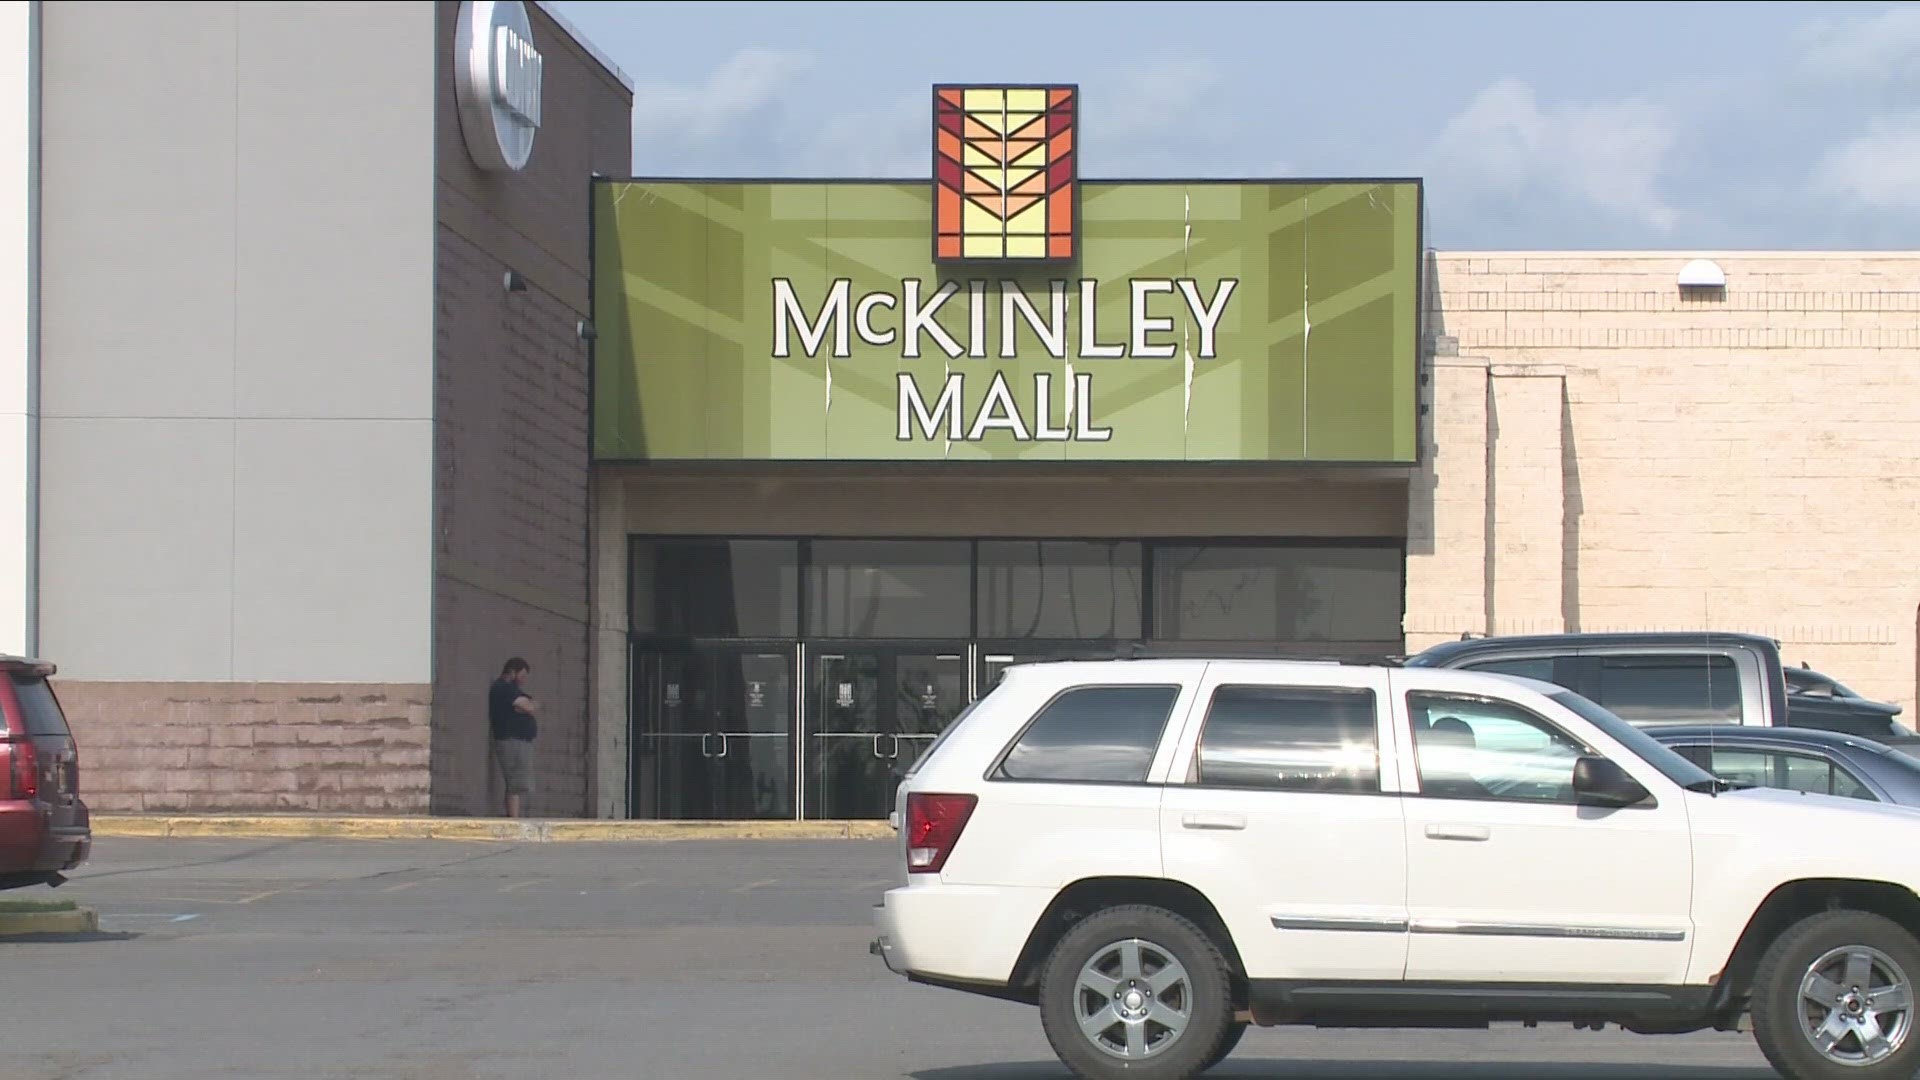 Kohan Retail Investment Group which owns the site told Buffalo Business First - there is no plan to continue selling the McKinley Mall site.